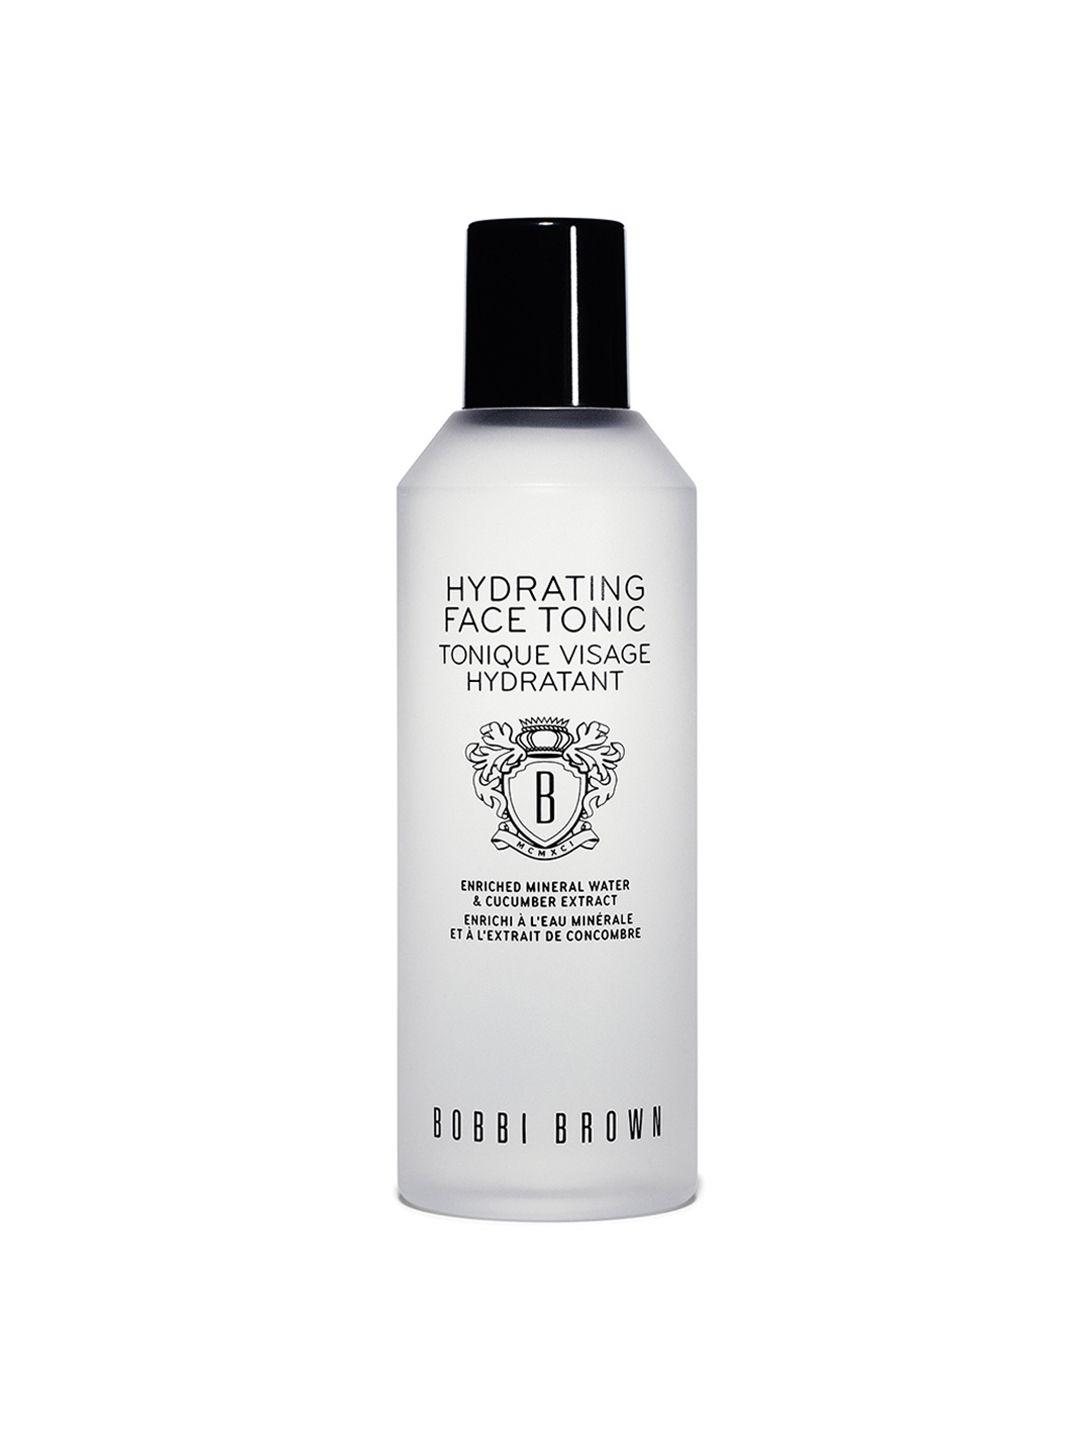 bobbi brown hydrating face tonic with cucumber extract & mineral water - 200 ml